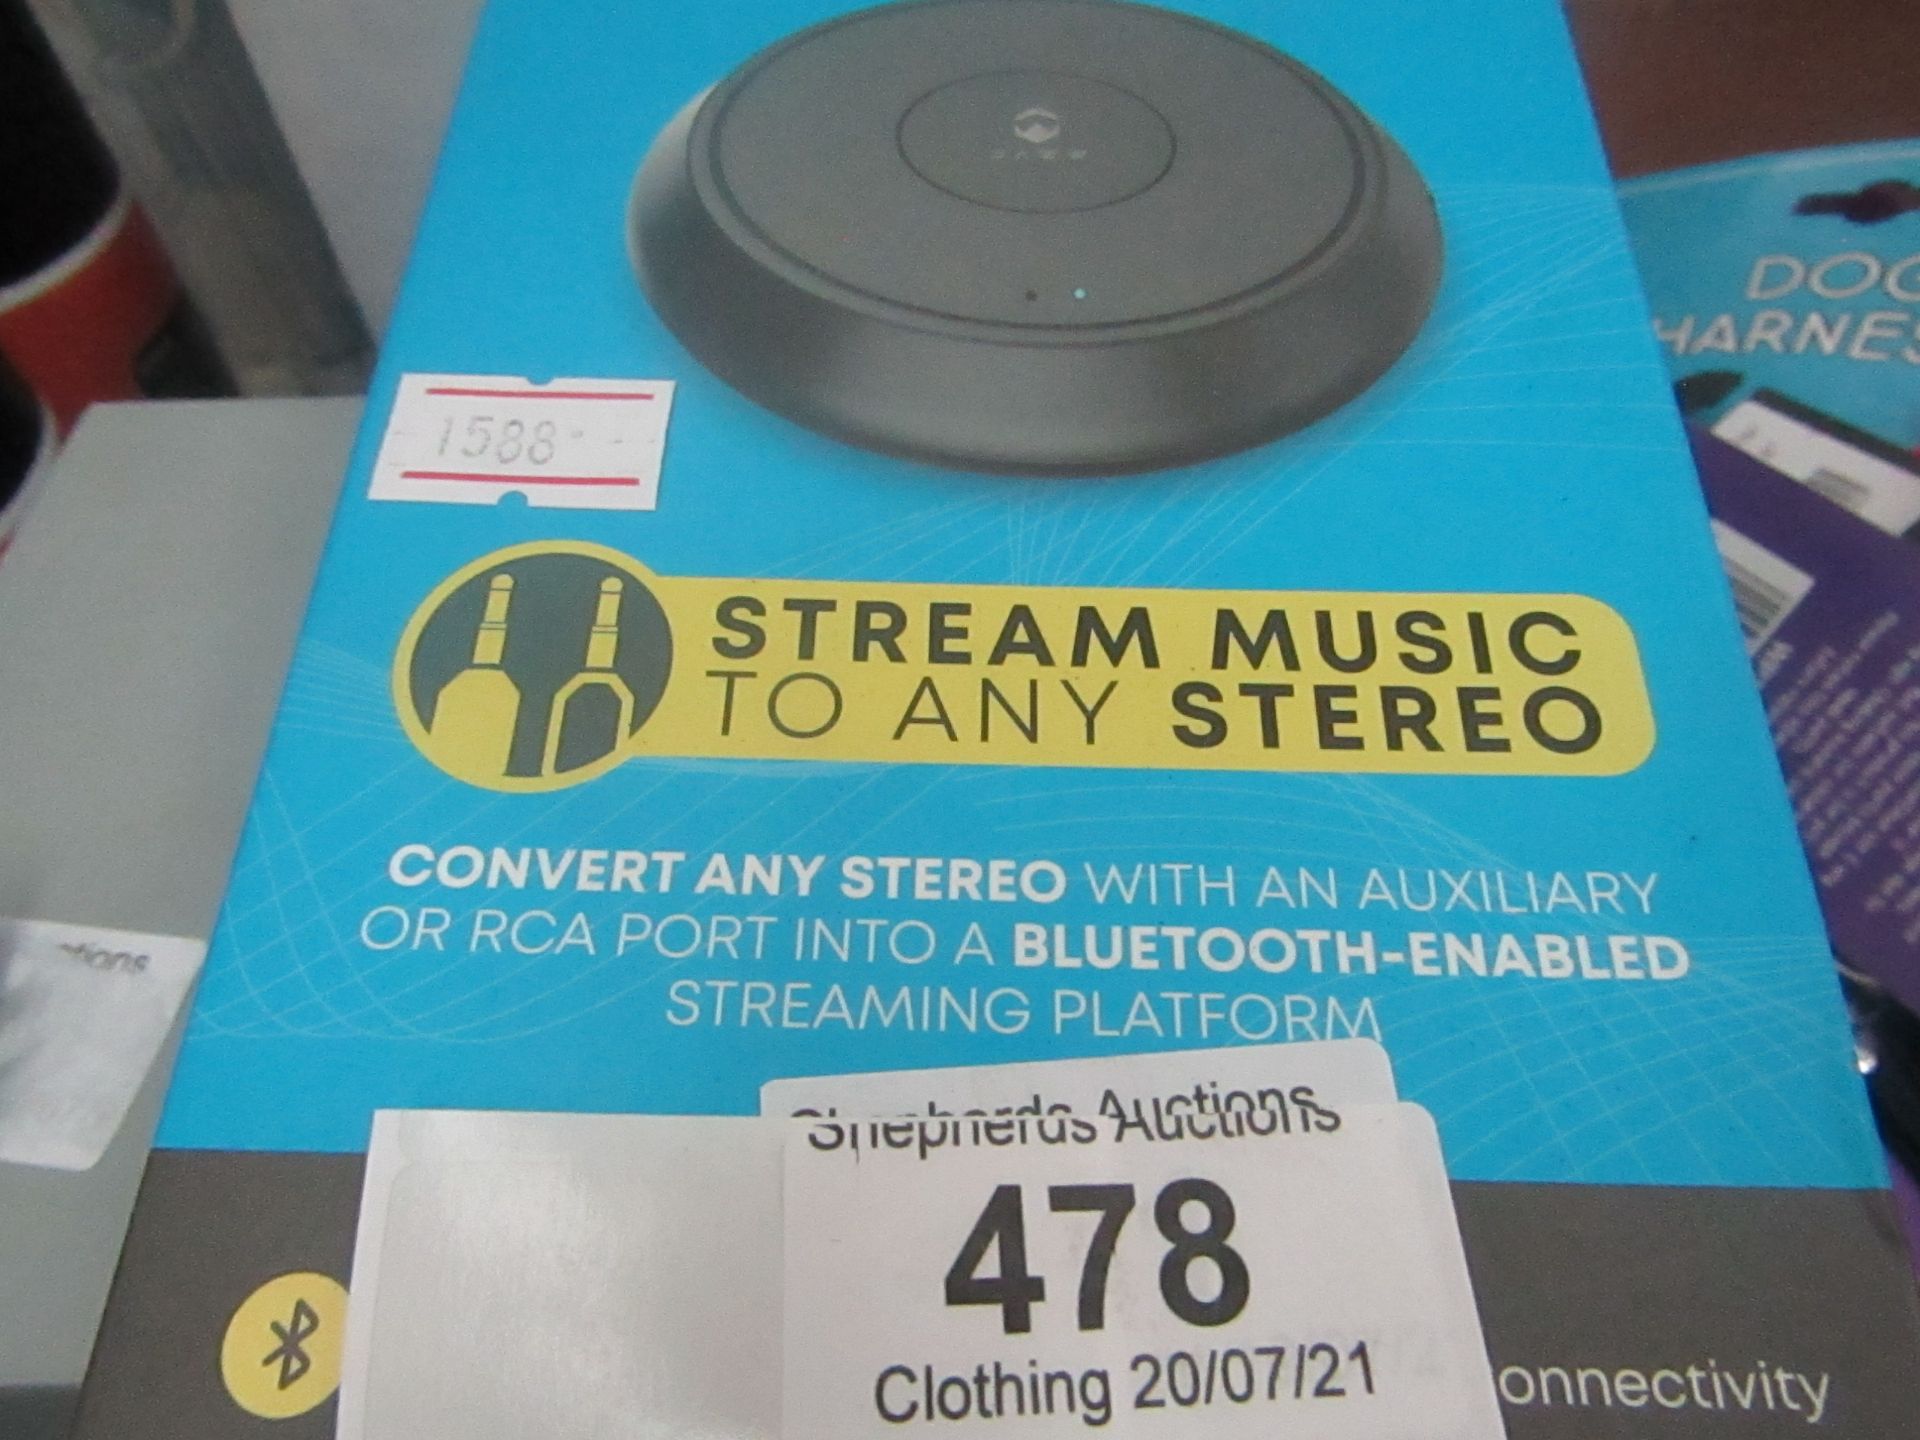 1 x PAWW - Wavecast RX (Stream Music to Any Stereo) - Unused & Boxed.